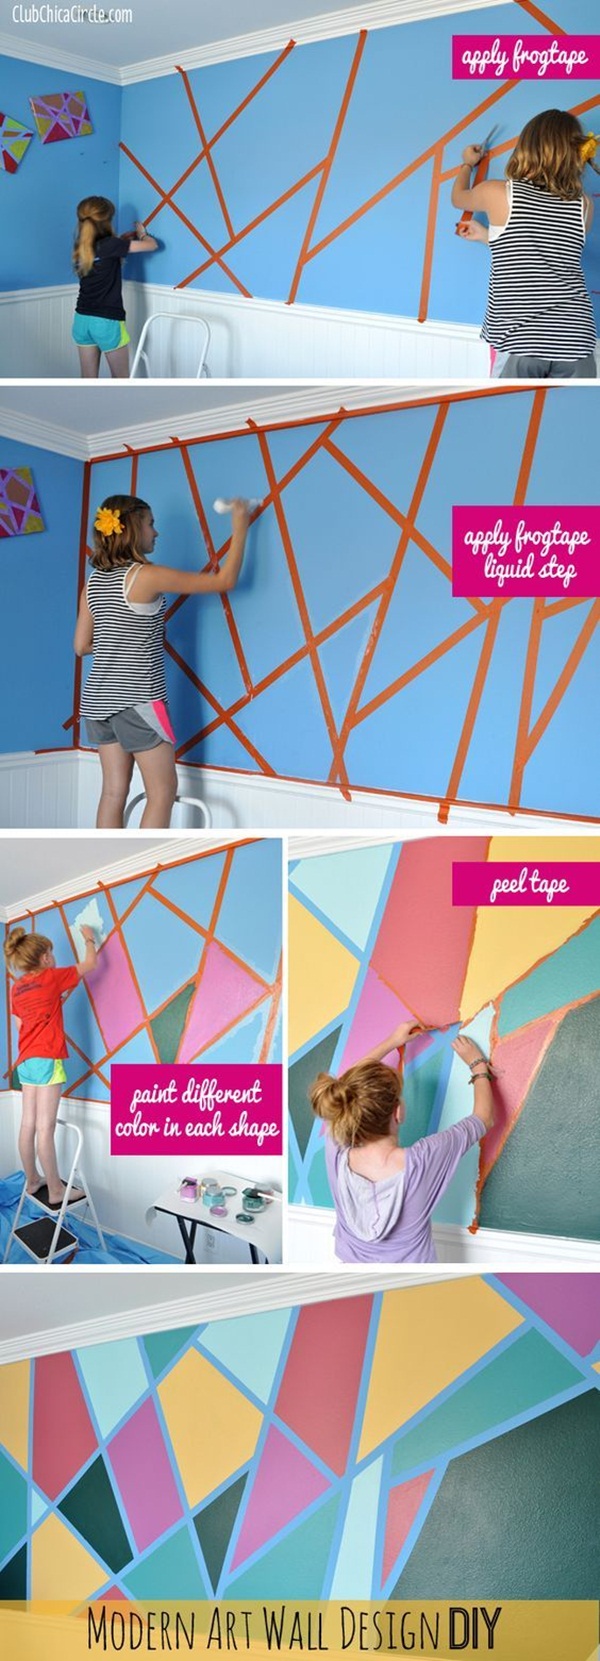  Diy Bedroom Wall Painting Ideas with Simple Decor